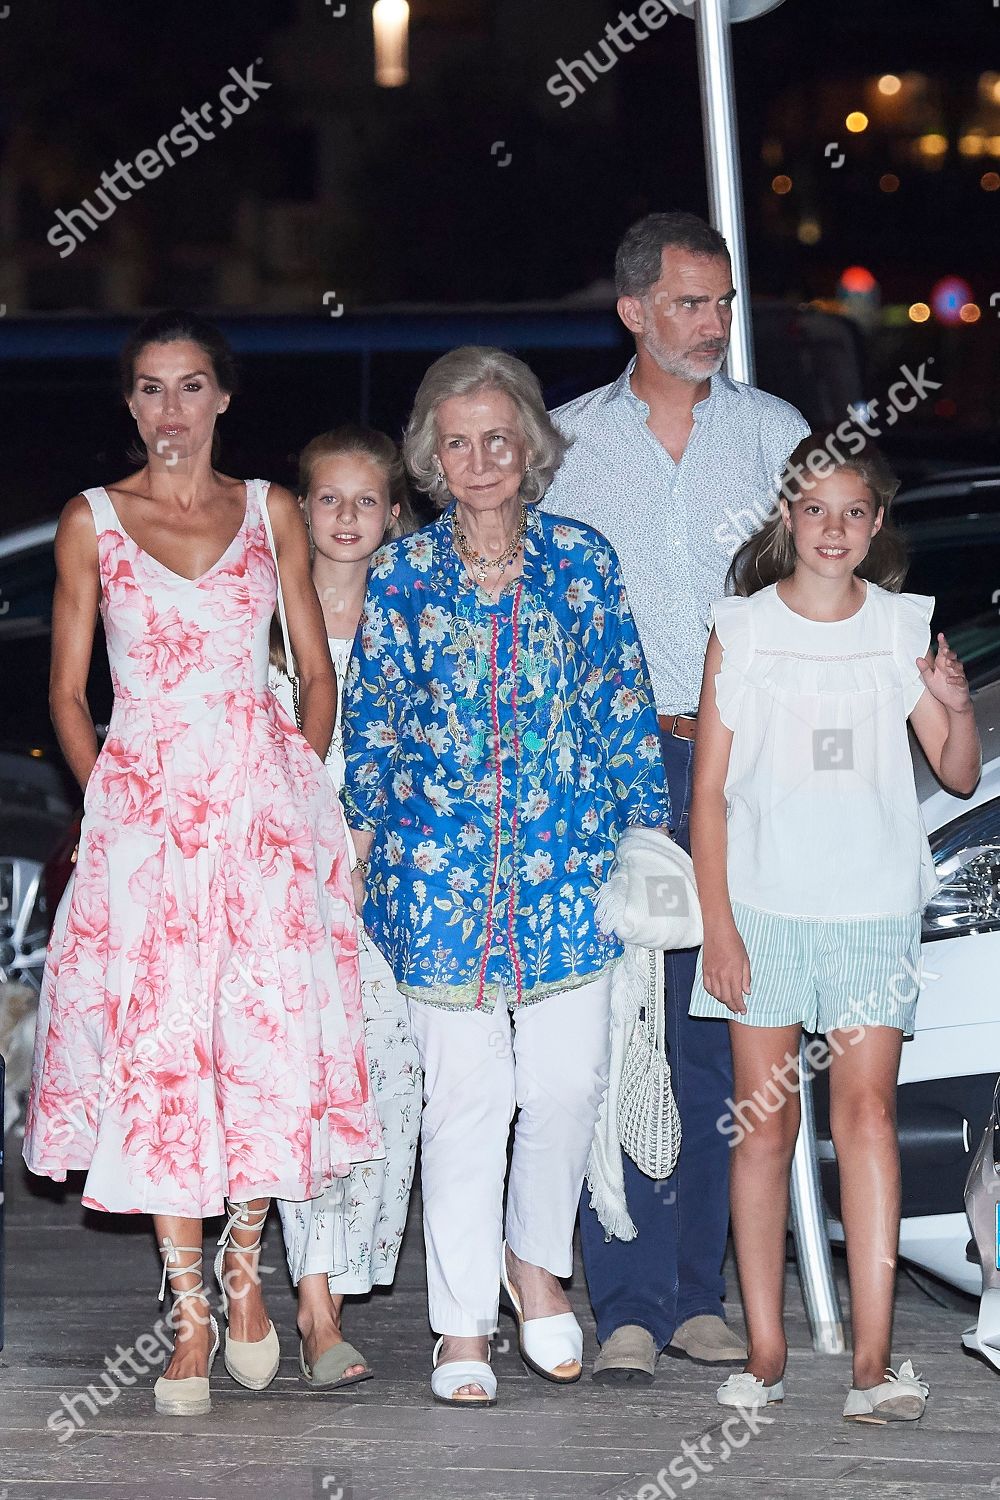 spanish-royals-out-and-about-palma-spain-shutterstock-editorial-10354136n.jpg